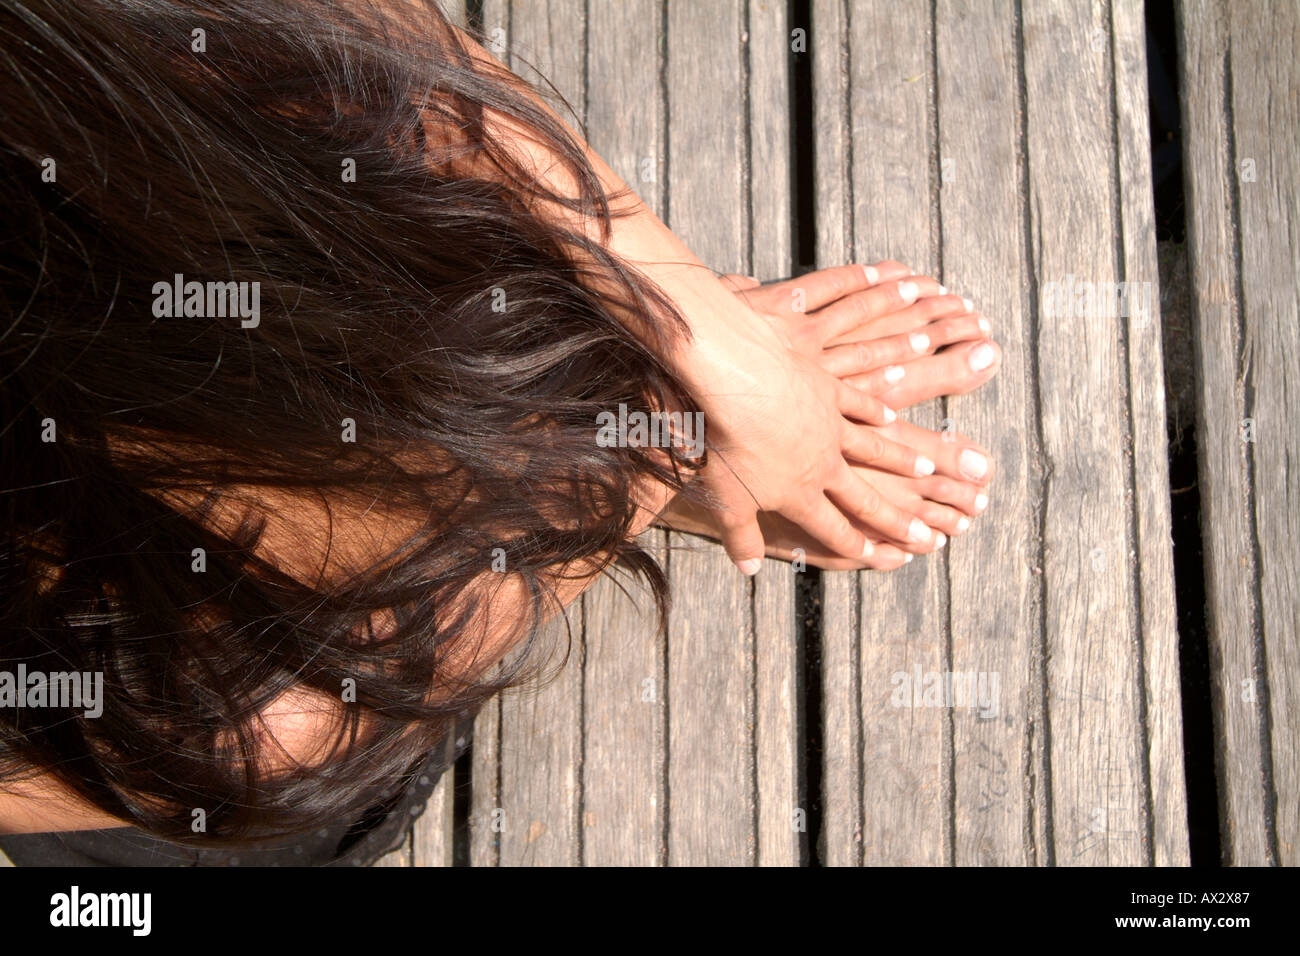 Body Soul young girl relaxing Hamburg Summer wood hair fingers hands Stock Photo